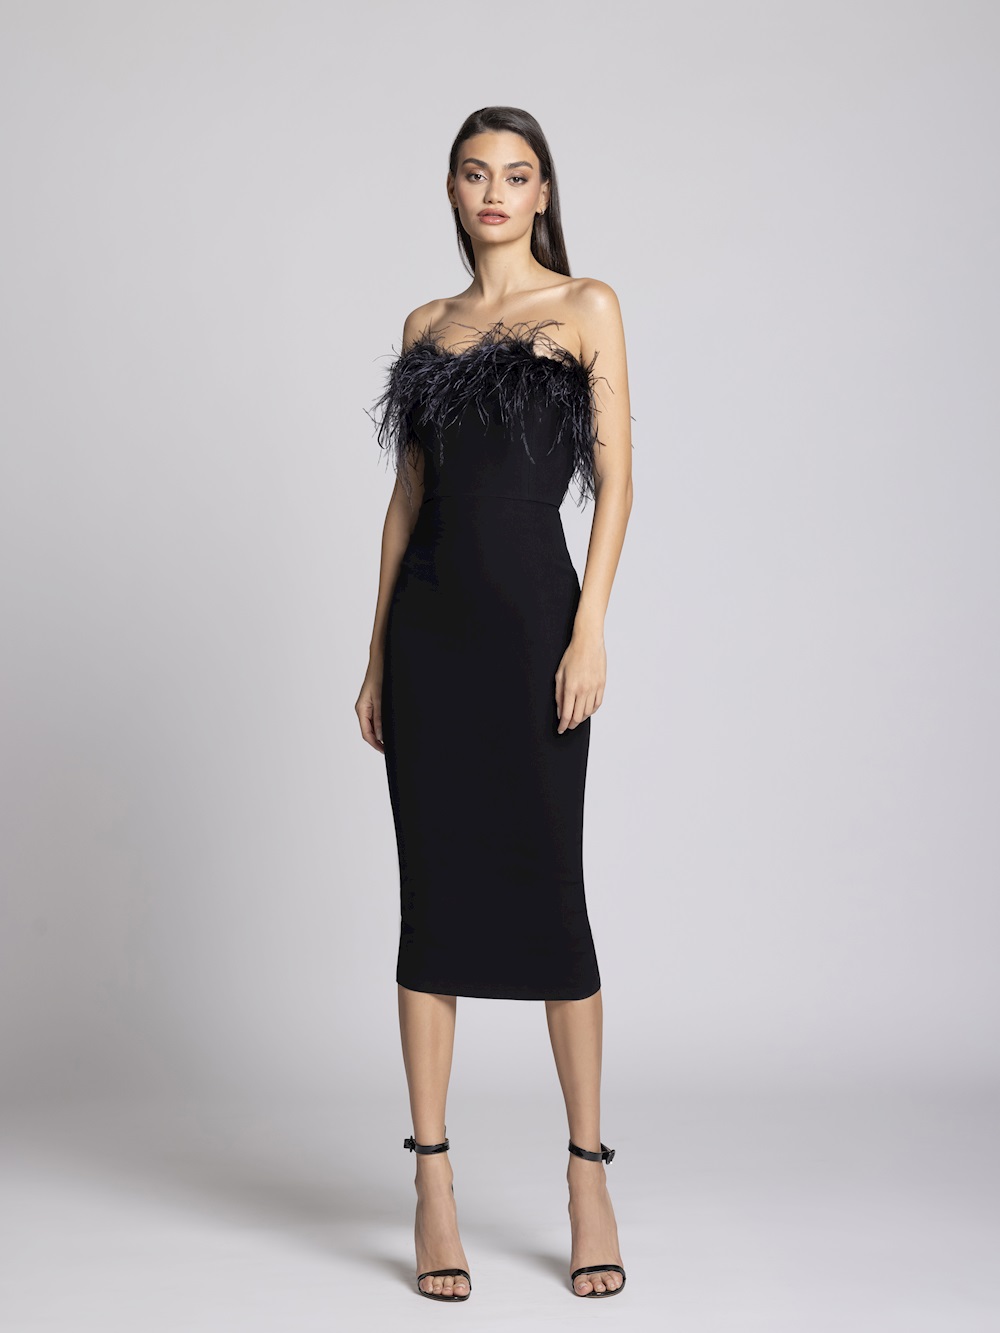 Strapless black dress with feathers - CLO - Online Store